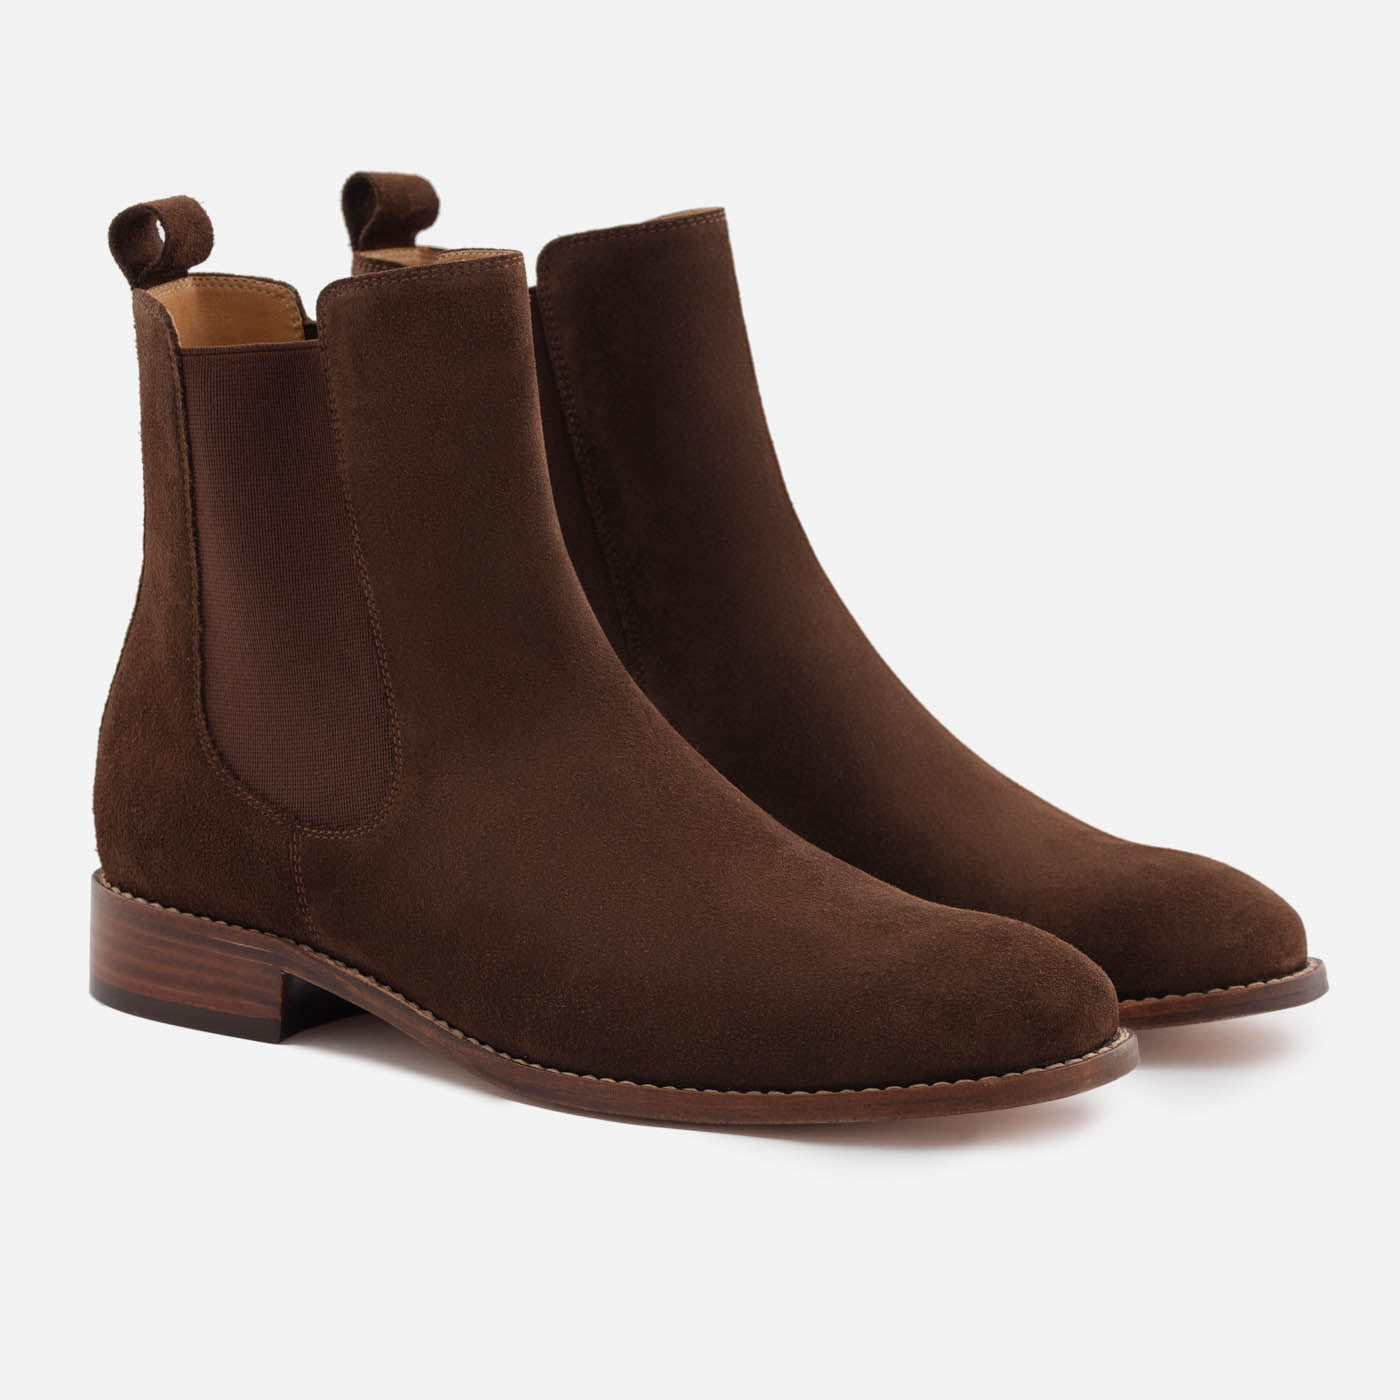 Maeve Chelsea Boots - Suede - Women's